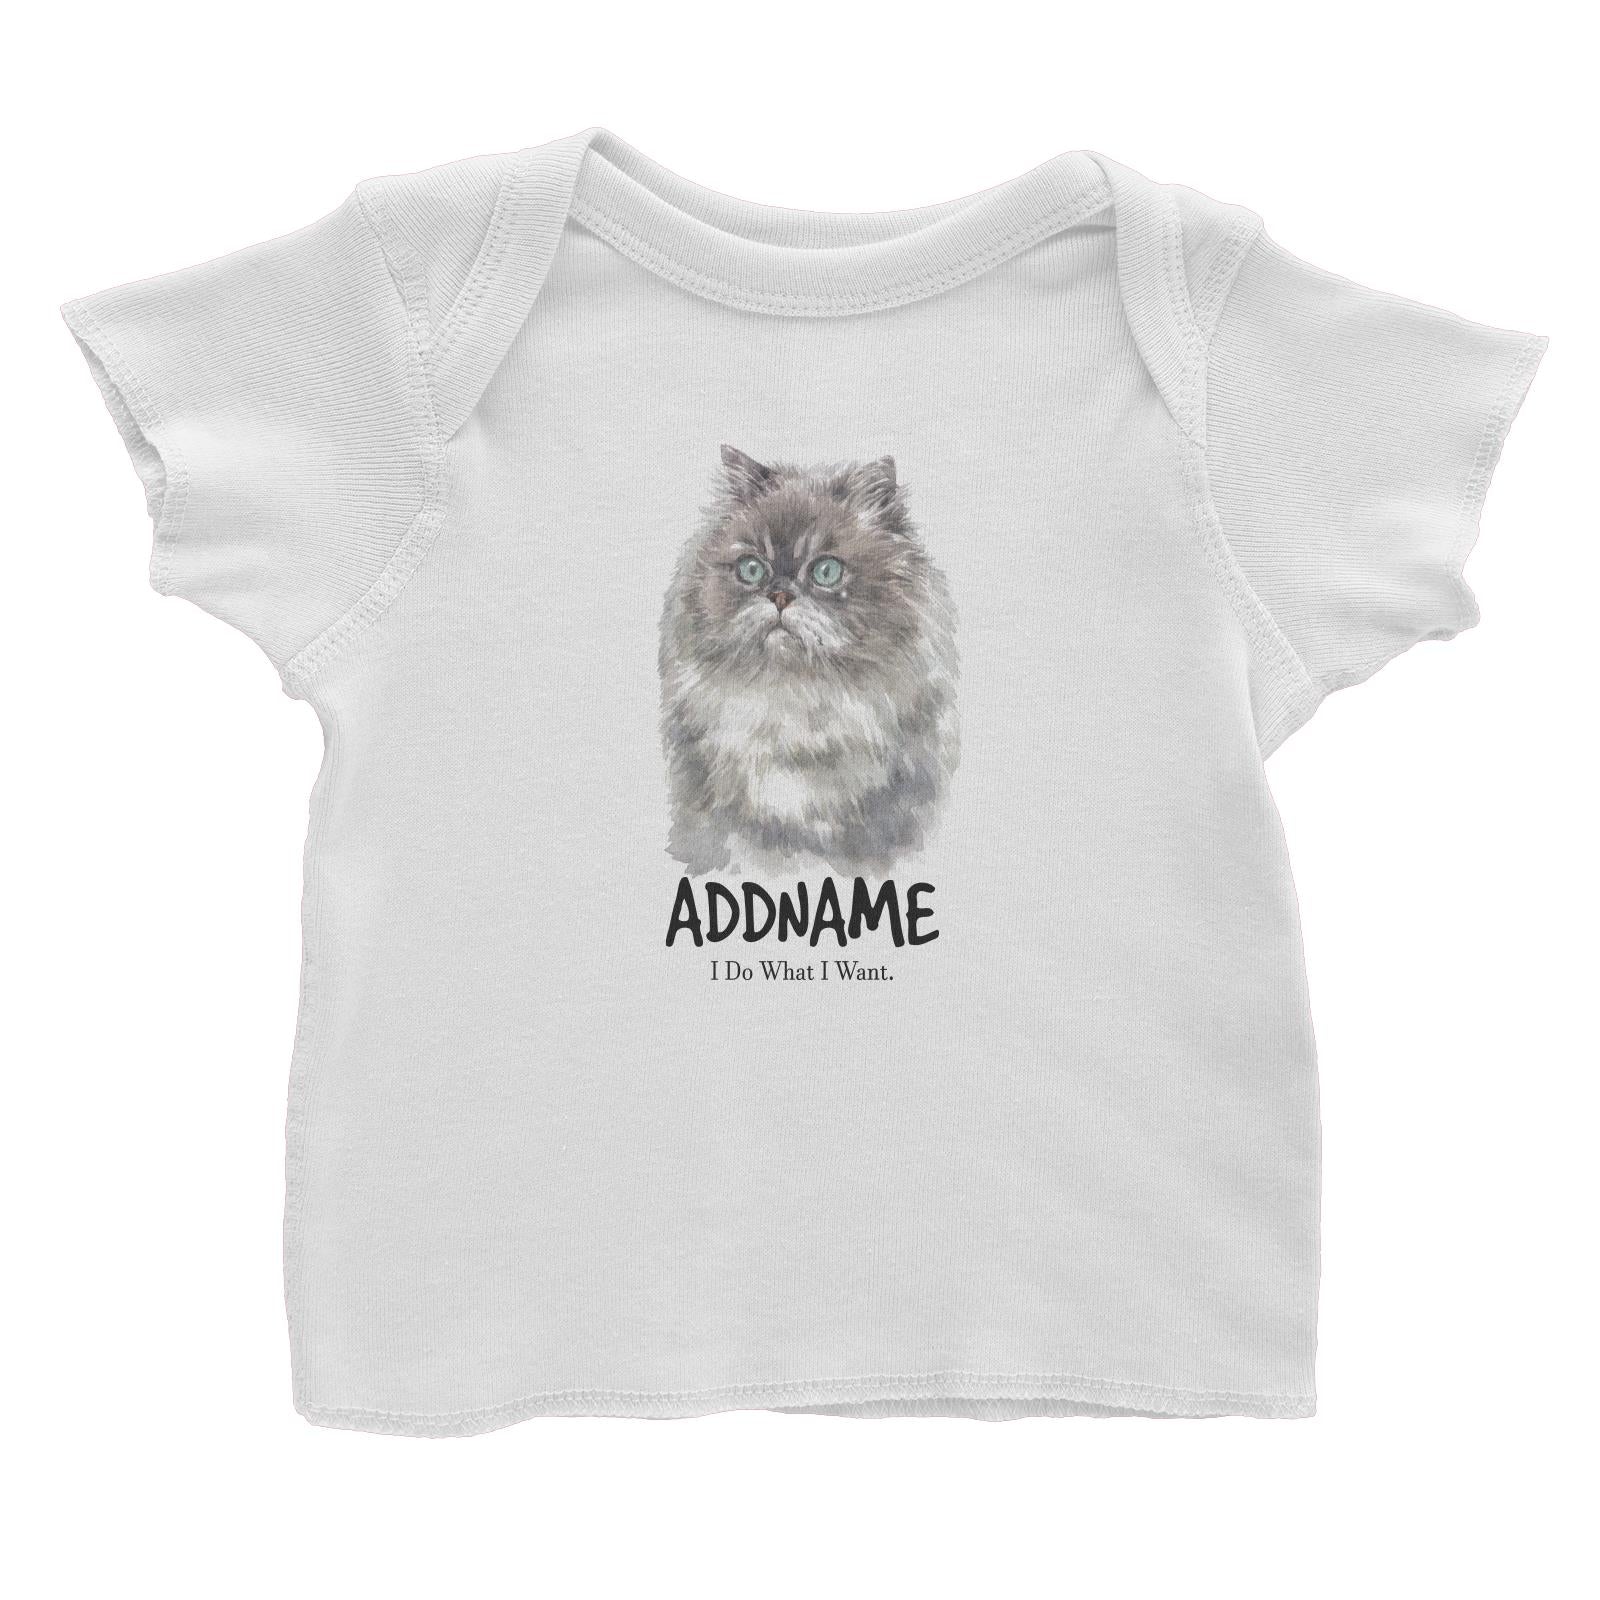 Watercolor Cat Himalayan Grey I Do What I Want Addname Baby T-Shirt